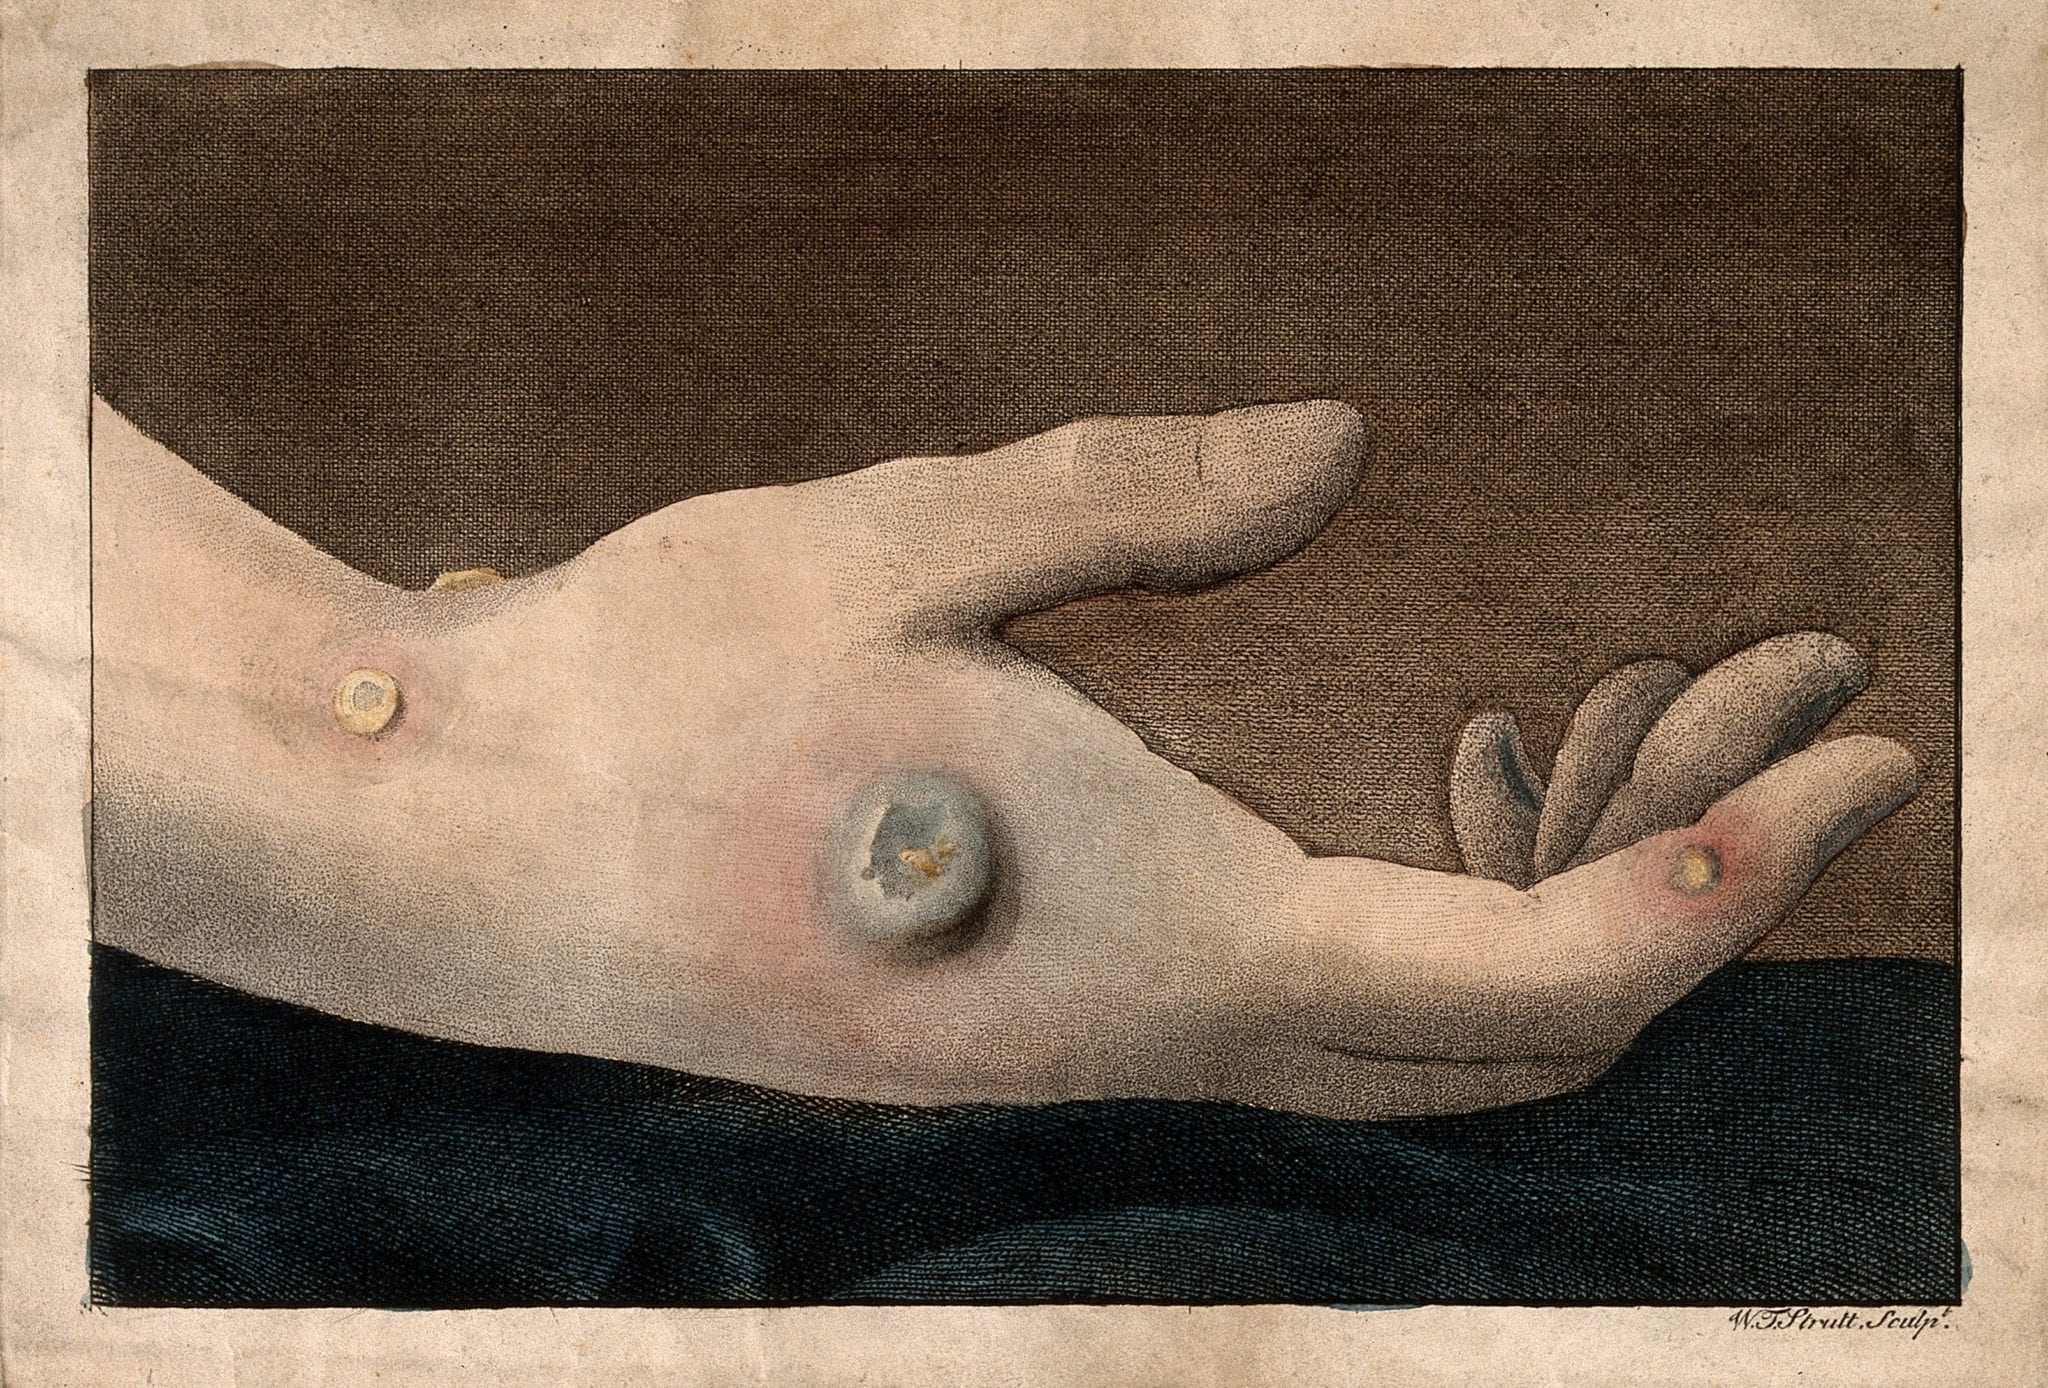 Hand with smallpox pustules, which would have been used for variolation